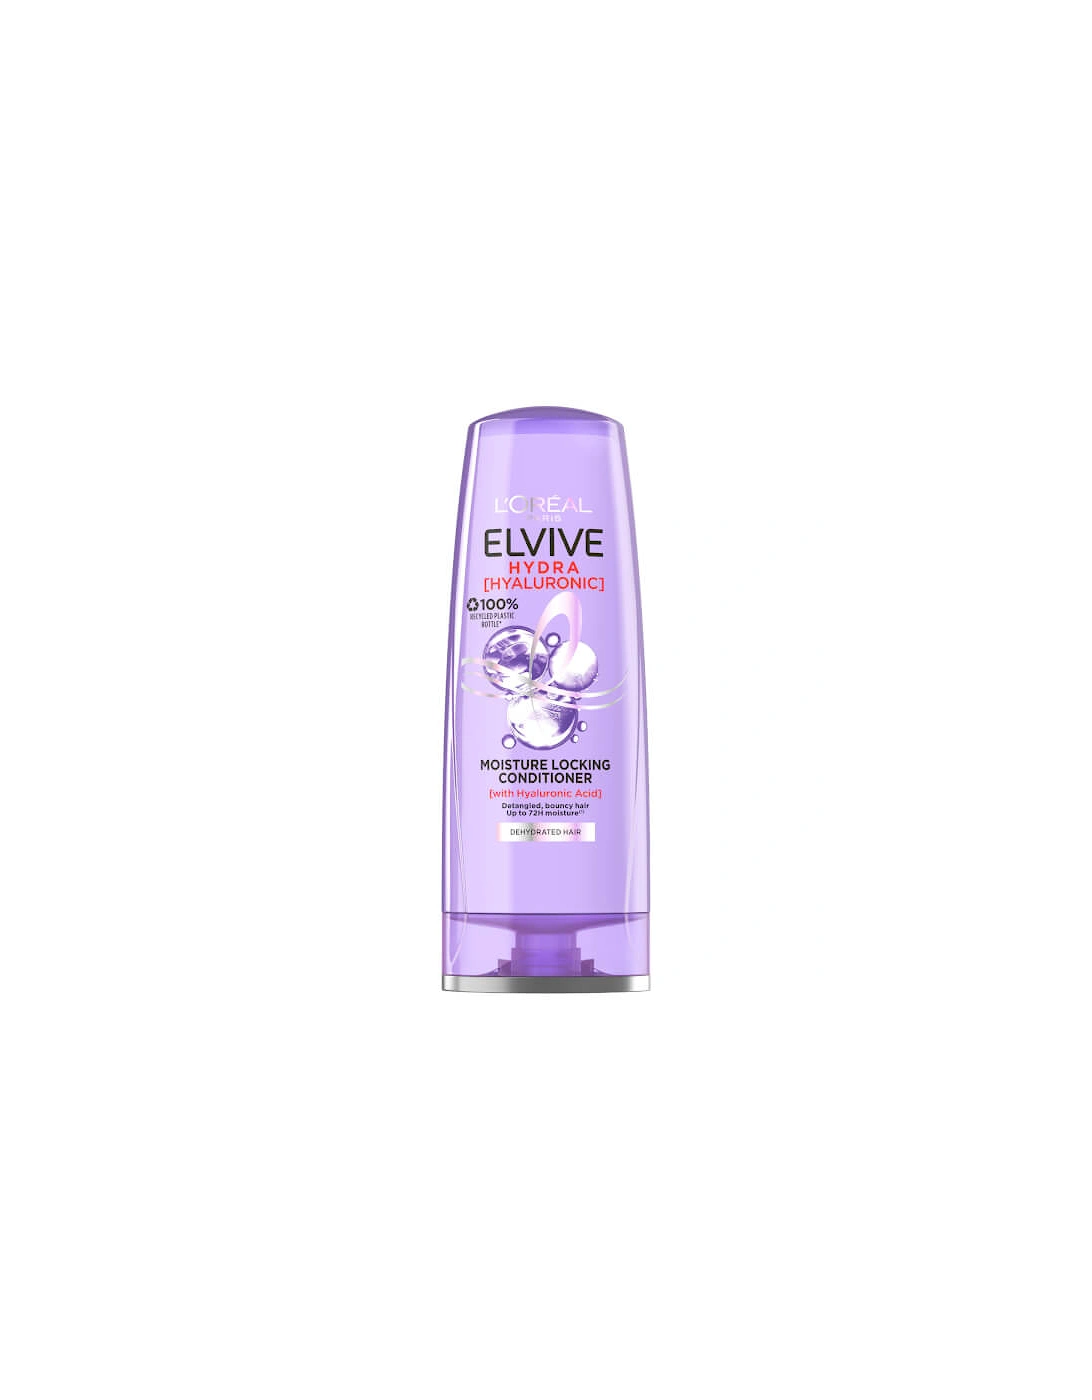 L'Oreal Elvive Hydra Hyaluronic Acid Conditioner - 400ml, 2 of 1